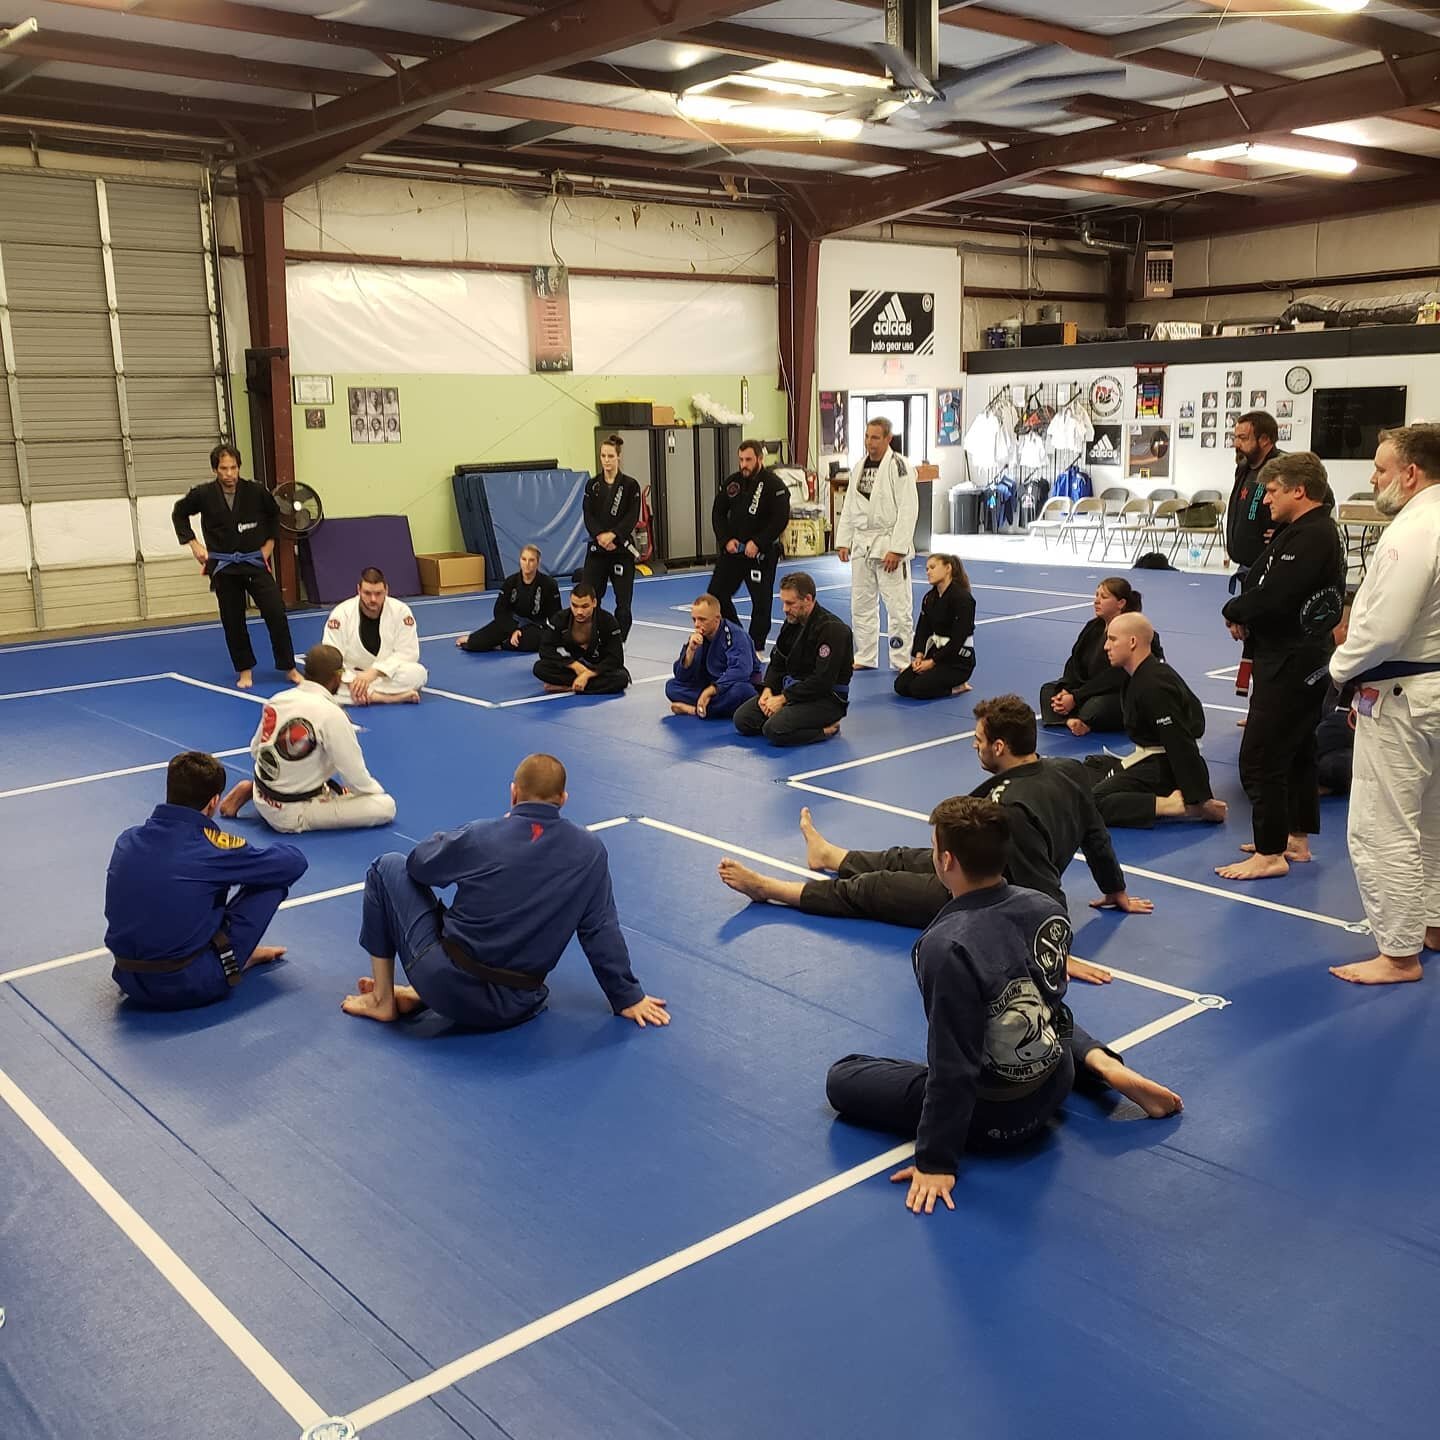 Hey folks. 
Random photos taken during our great seminar with @vicentebjj here at @w2wma 
Feel free to tag yourselves.
#doagooddeed #bjj #jiujitsu #jitzlife #life #delariva #respect